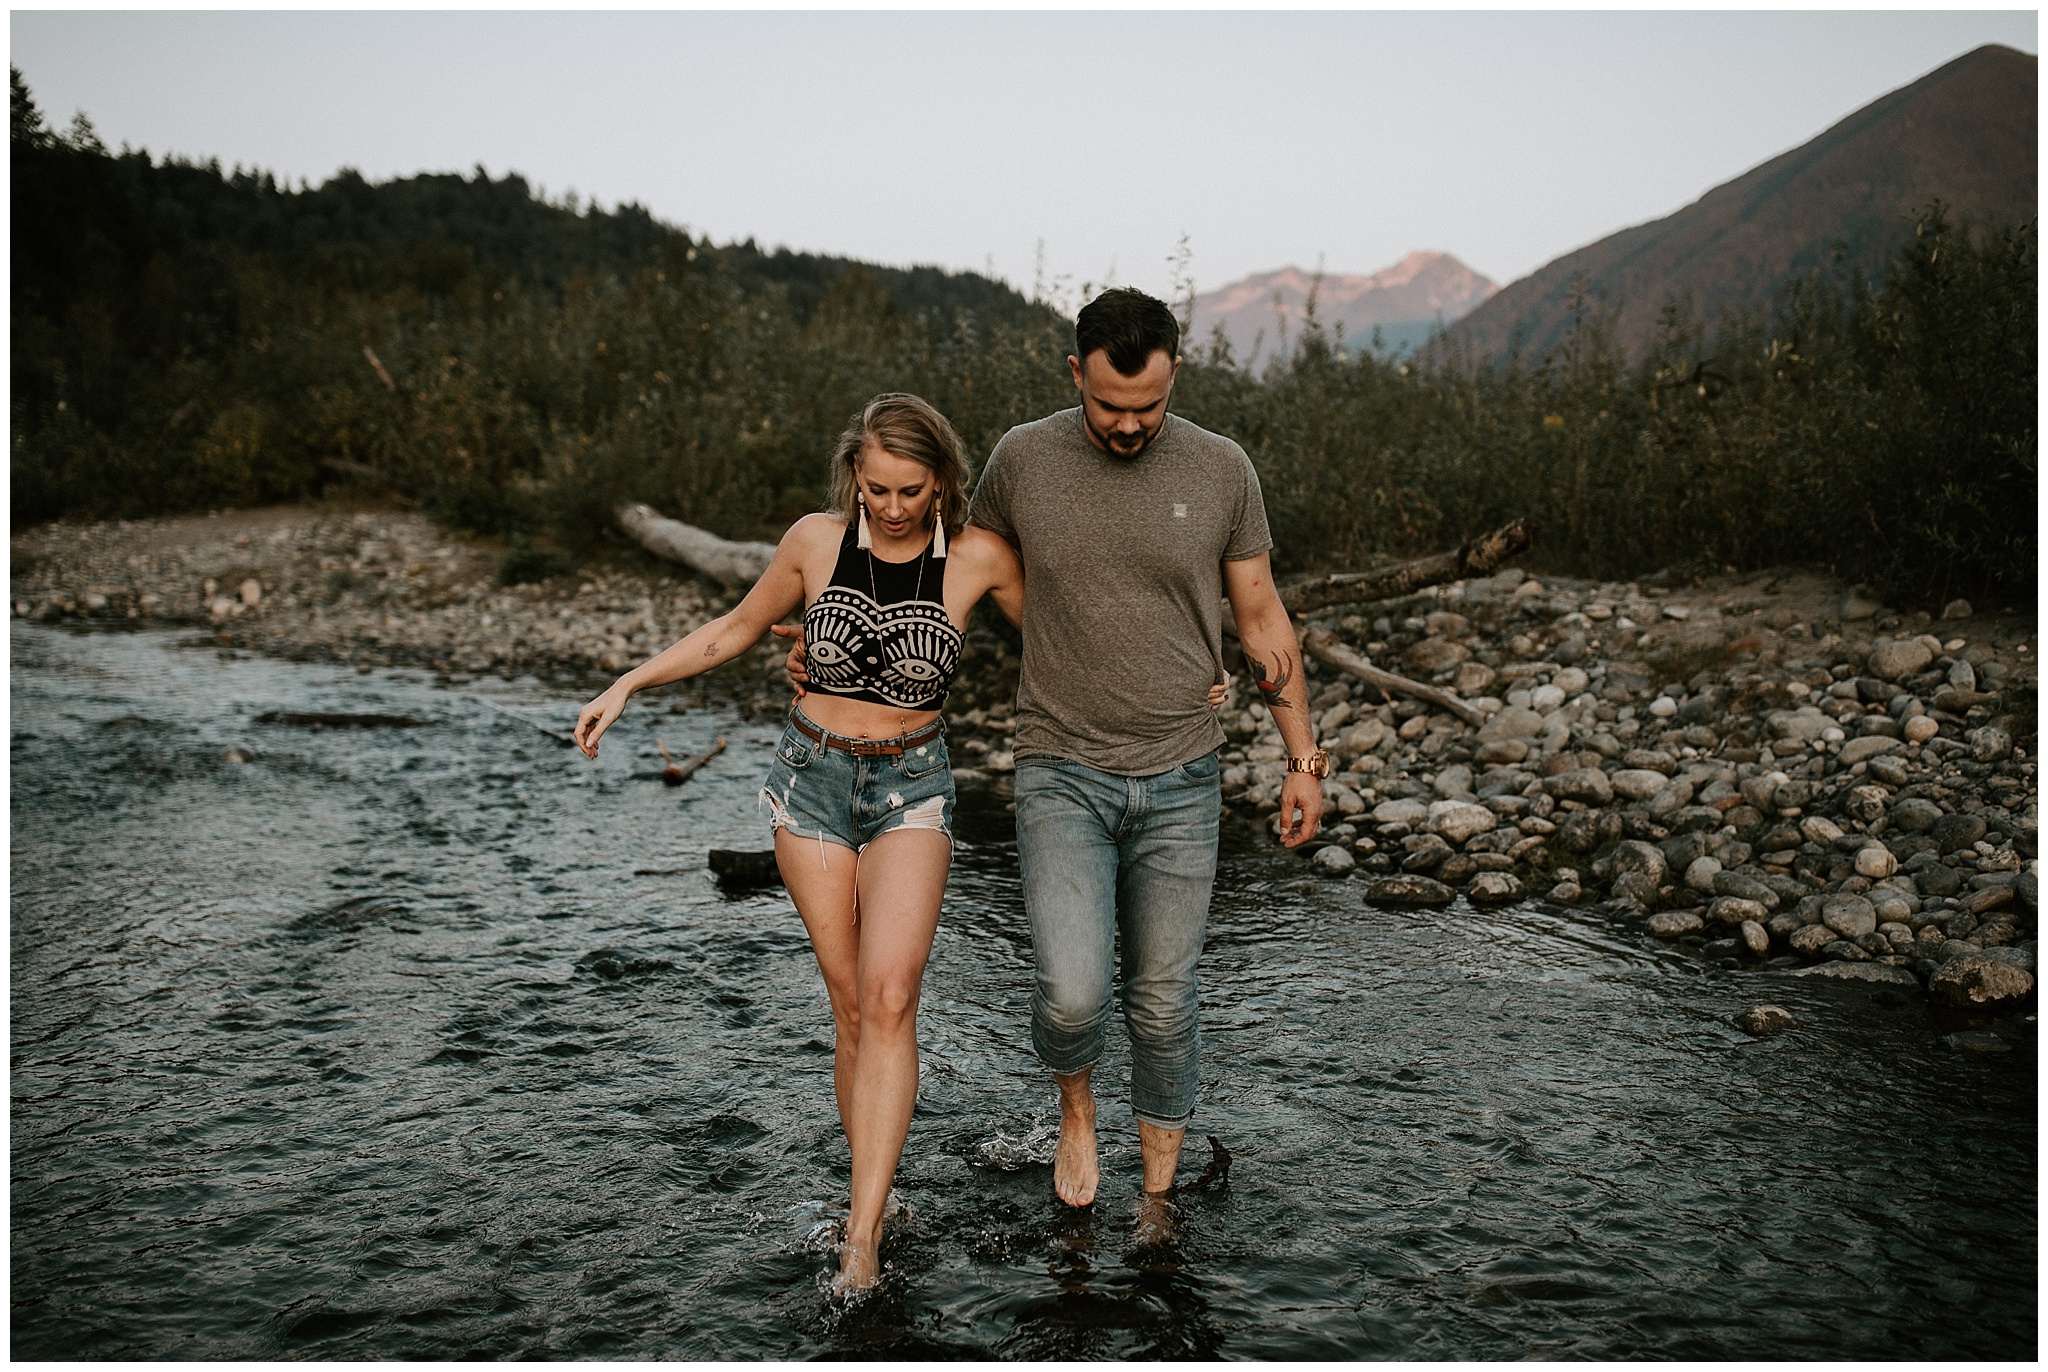 Engagement photos at the Vedder River in Chilliwack